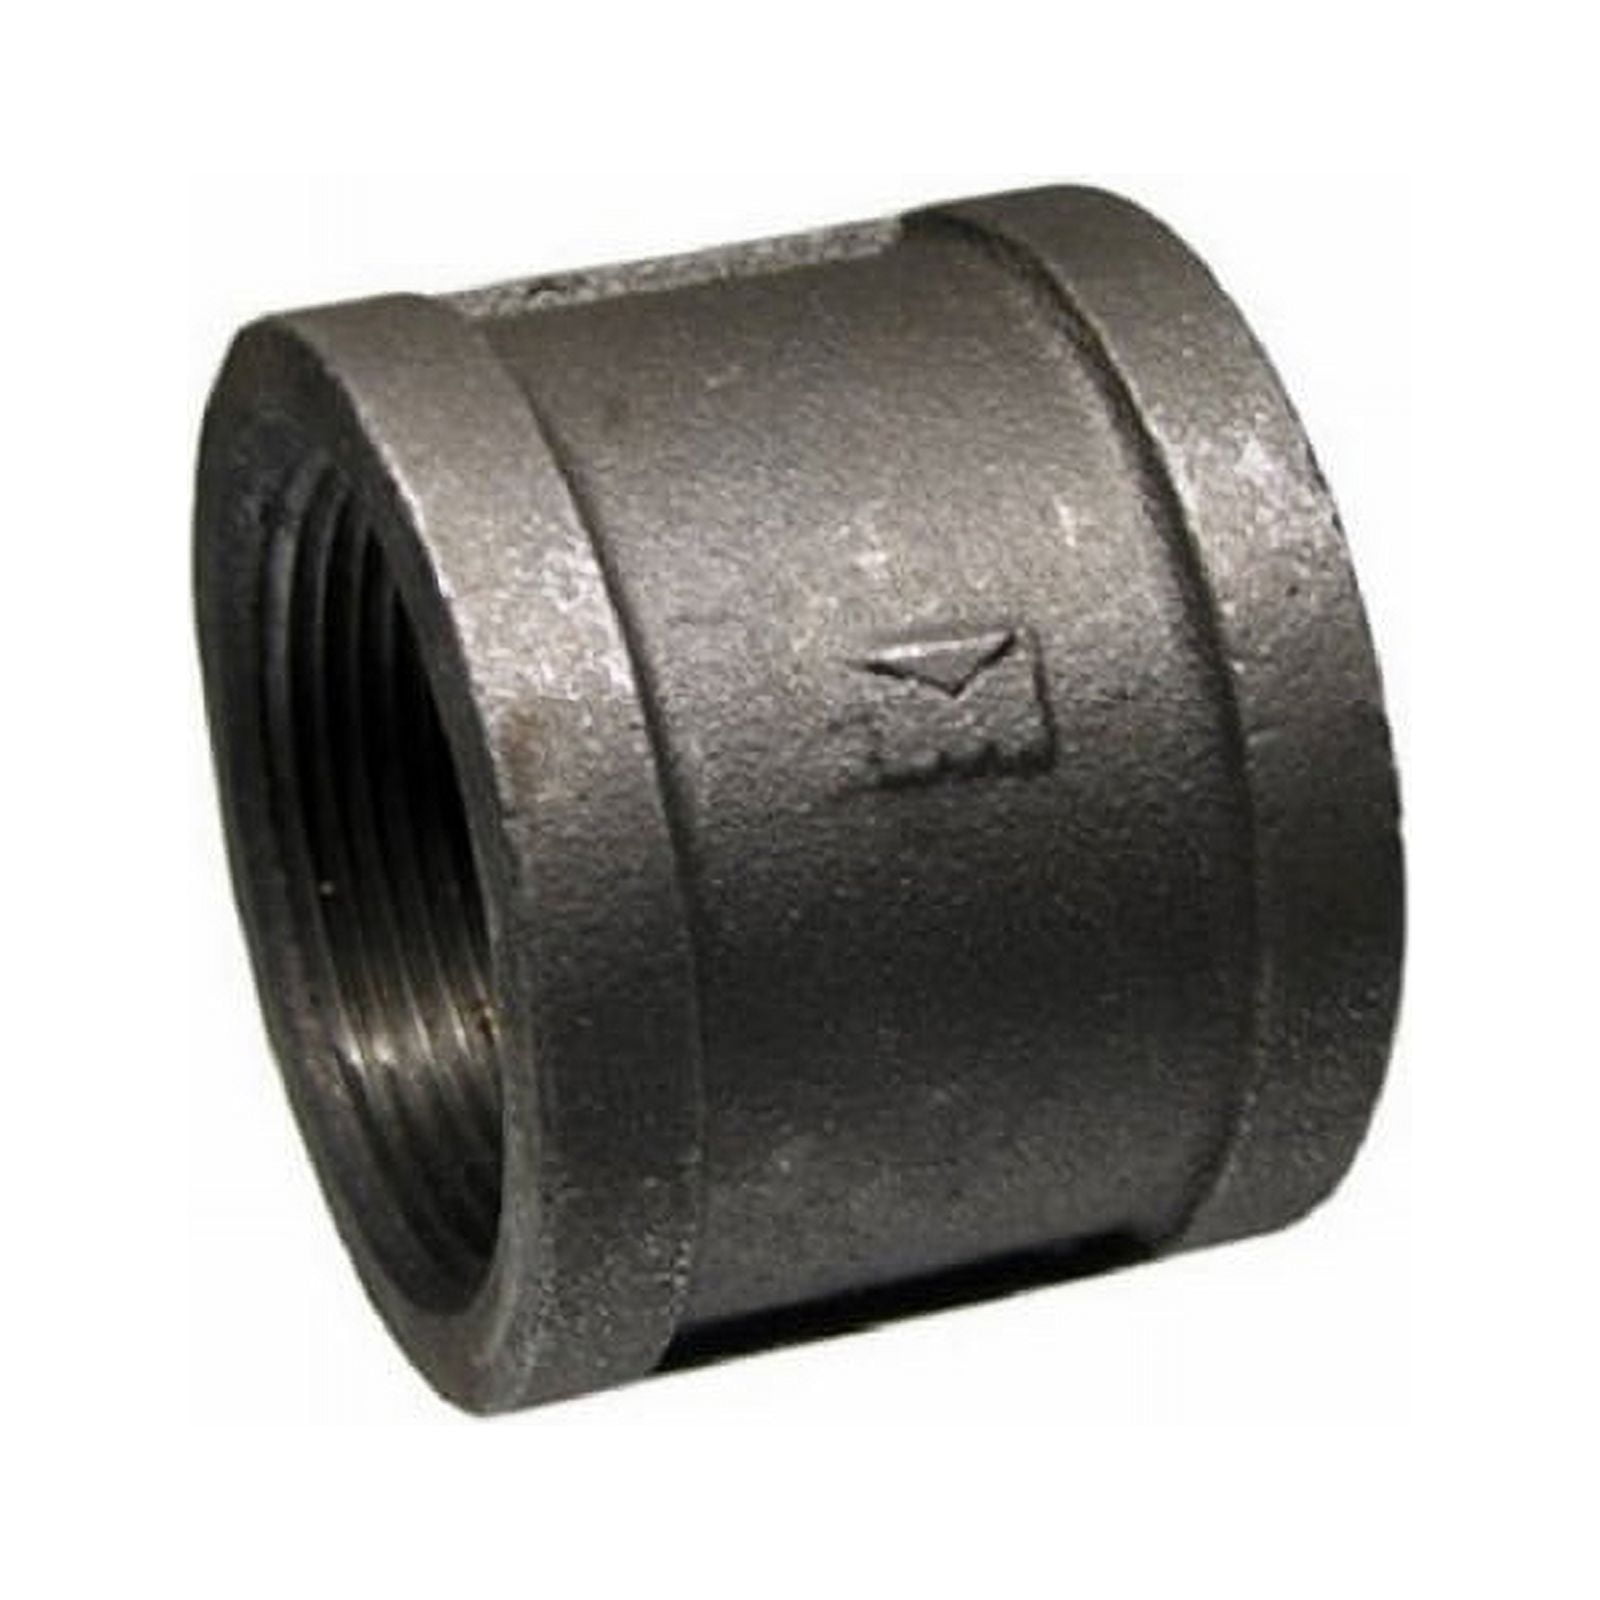 4908463 Southland 2.5 In. Fpt X 2.5 In. Dia. Fpt Black Malleable Iron Coupling